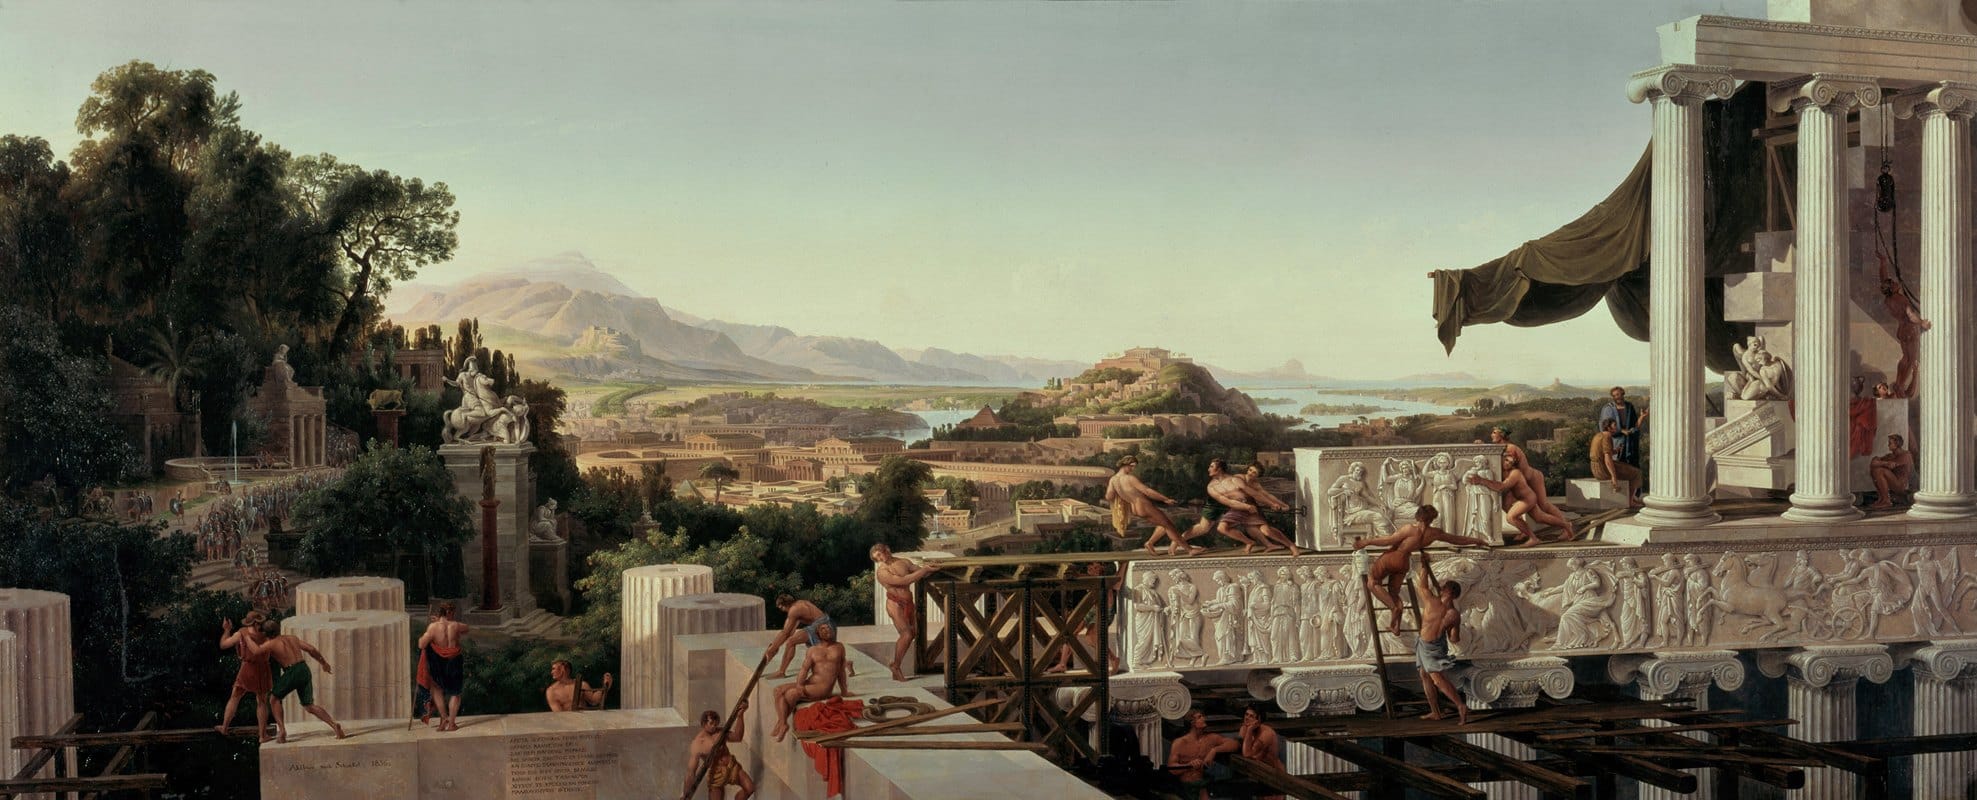 August Ahlborn - View into the Heyday of Greece